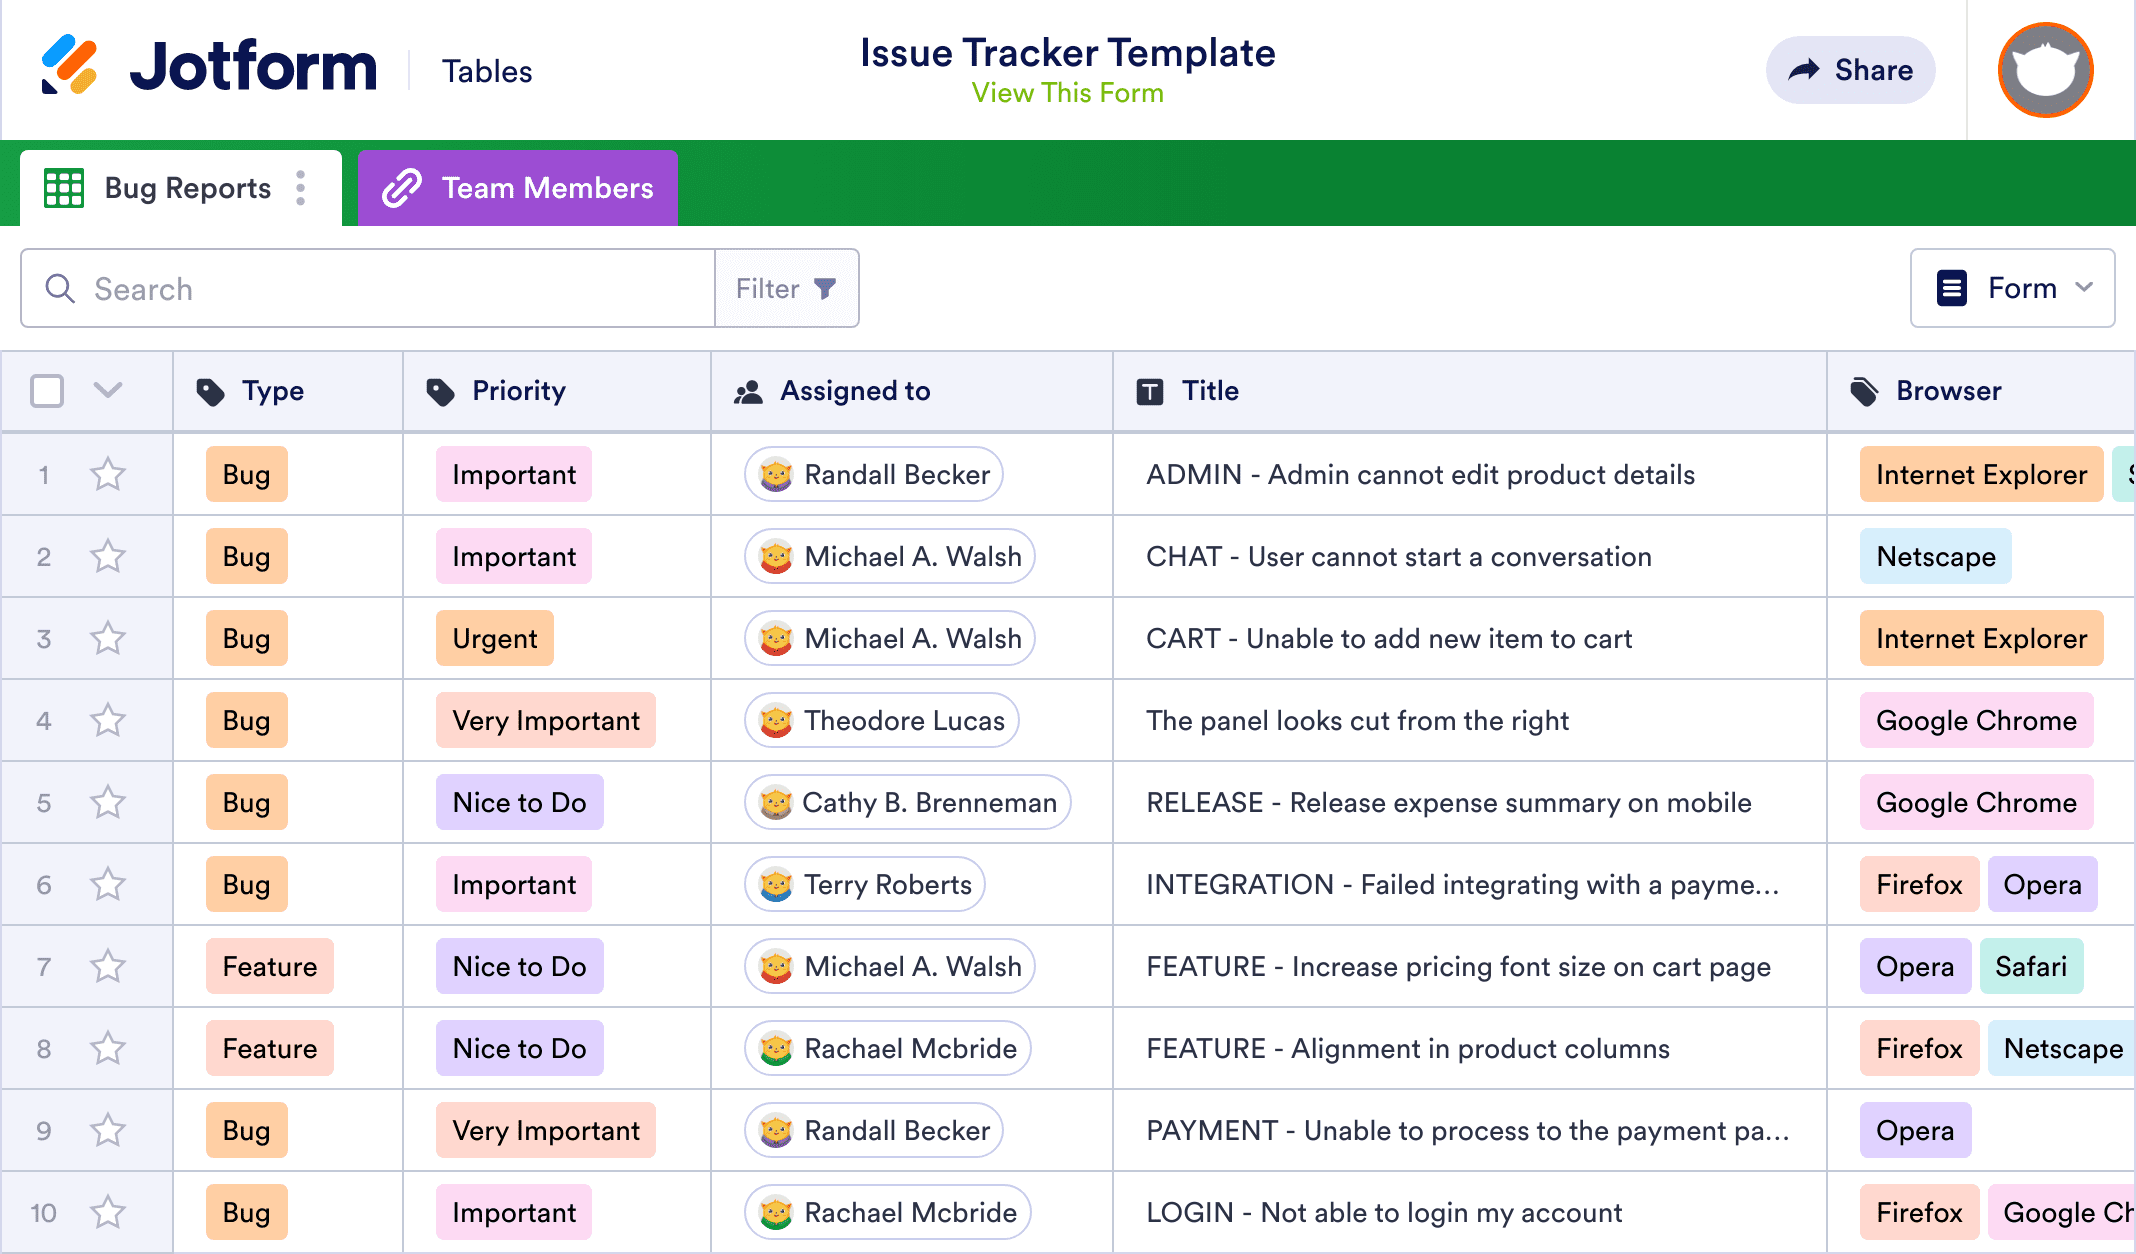 Issue Tracker Template